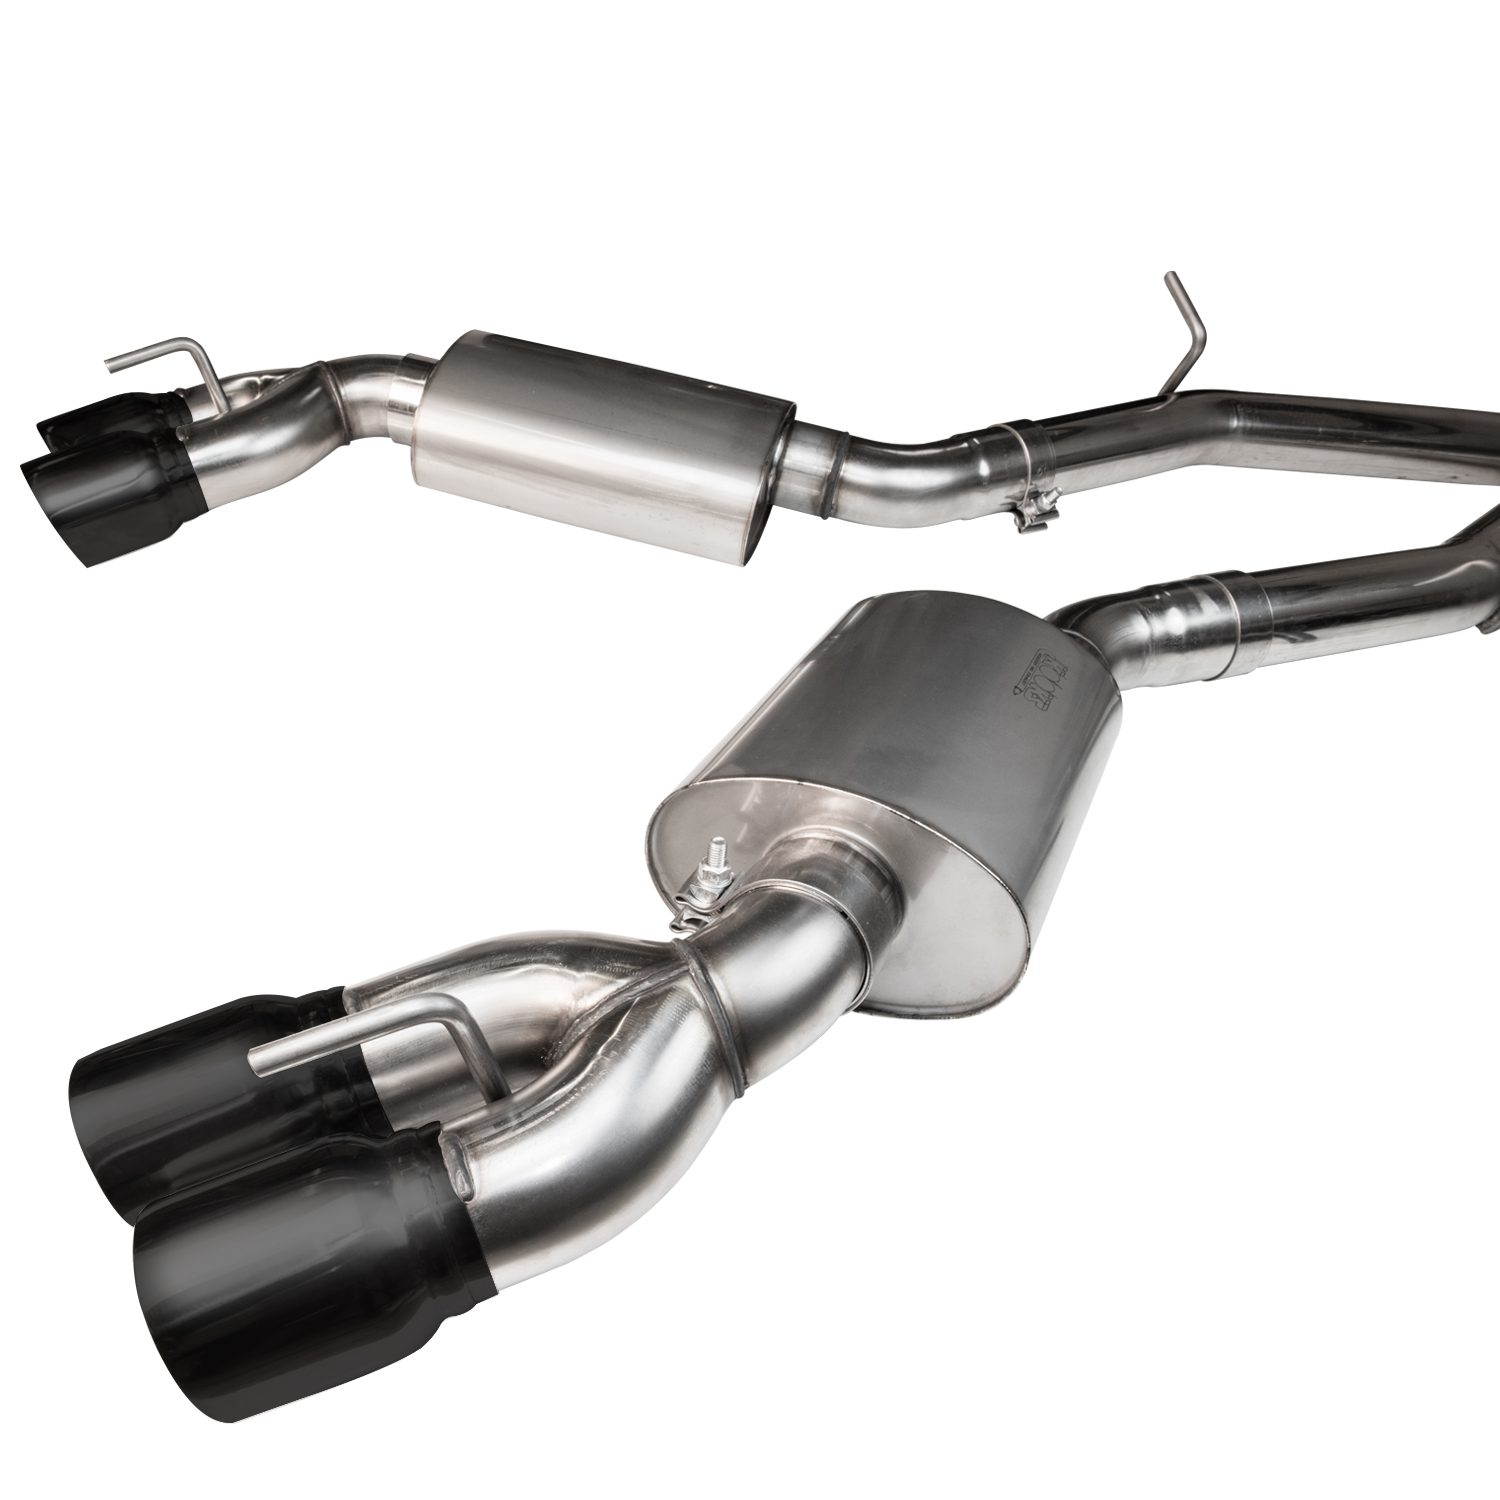 2016+ Chevrolet Camaro SS LT1 6.2L & 2017+ Chevrolet Camaro ZL1 LT4 6.2L Complete 3 inch Catted Exhaust System w/X-Pipe, Oval Ra